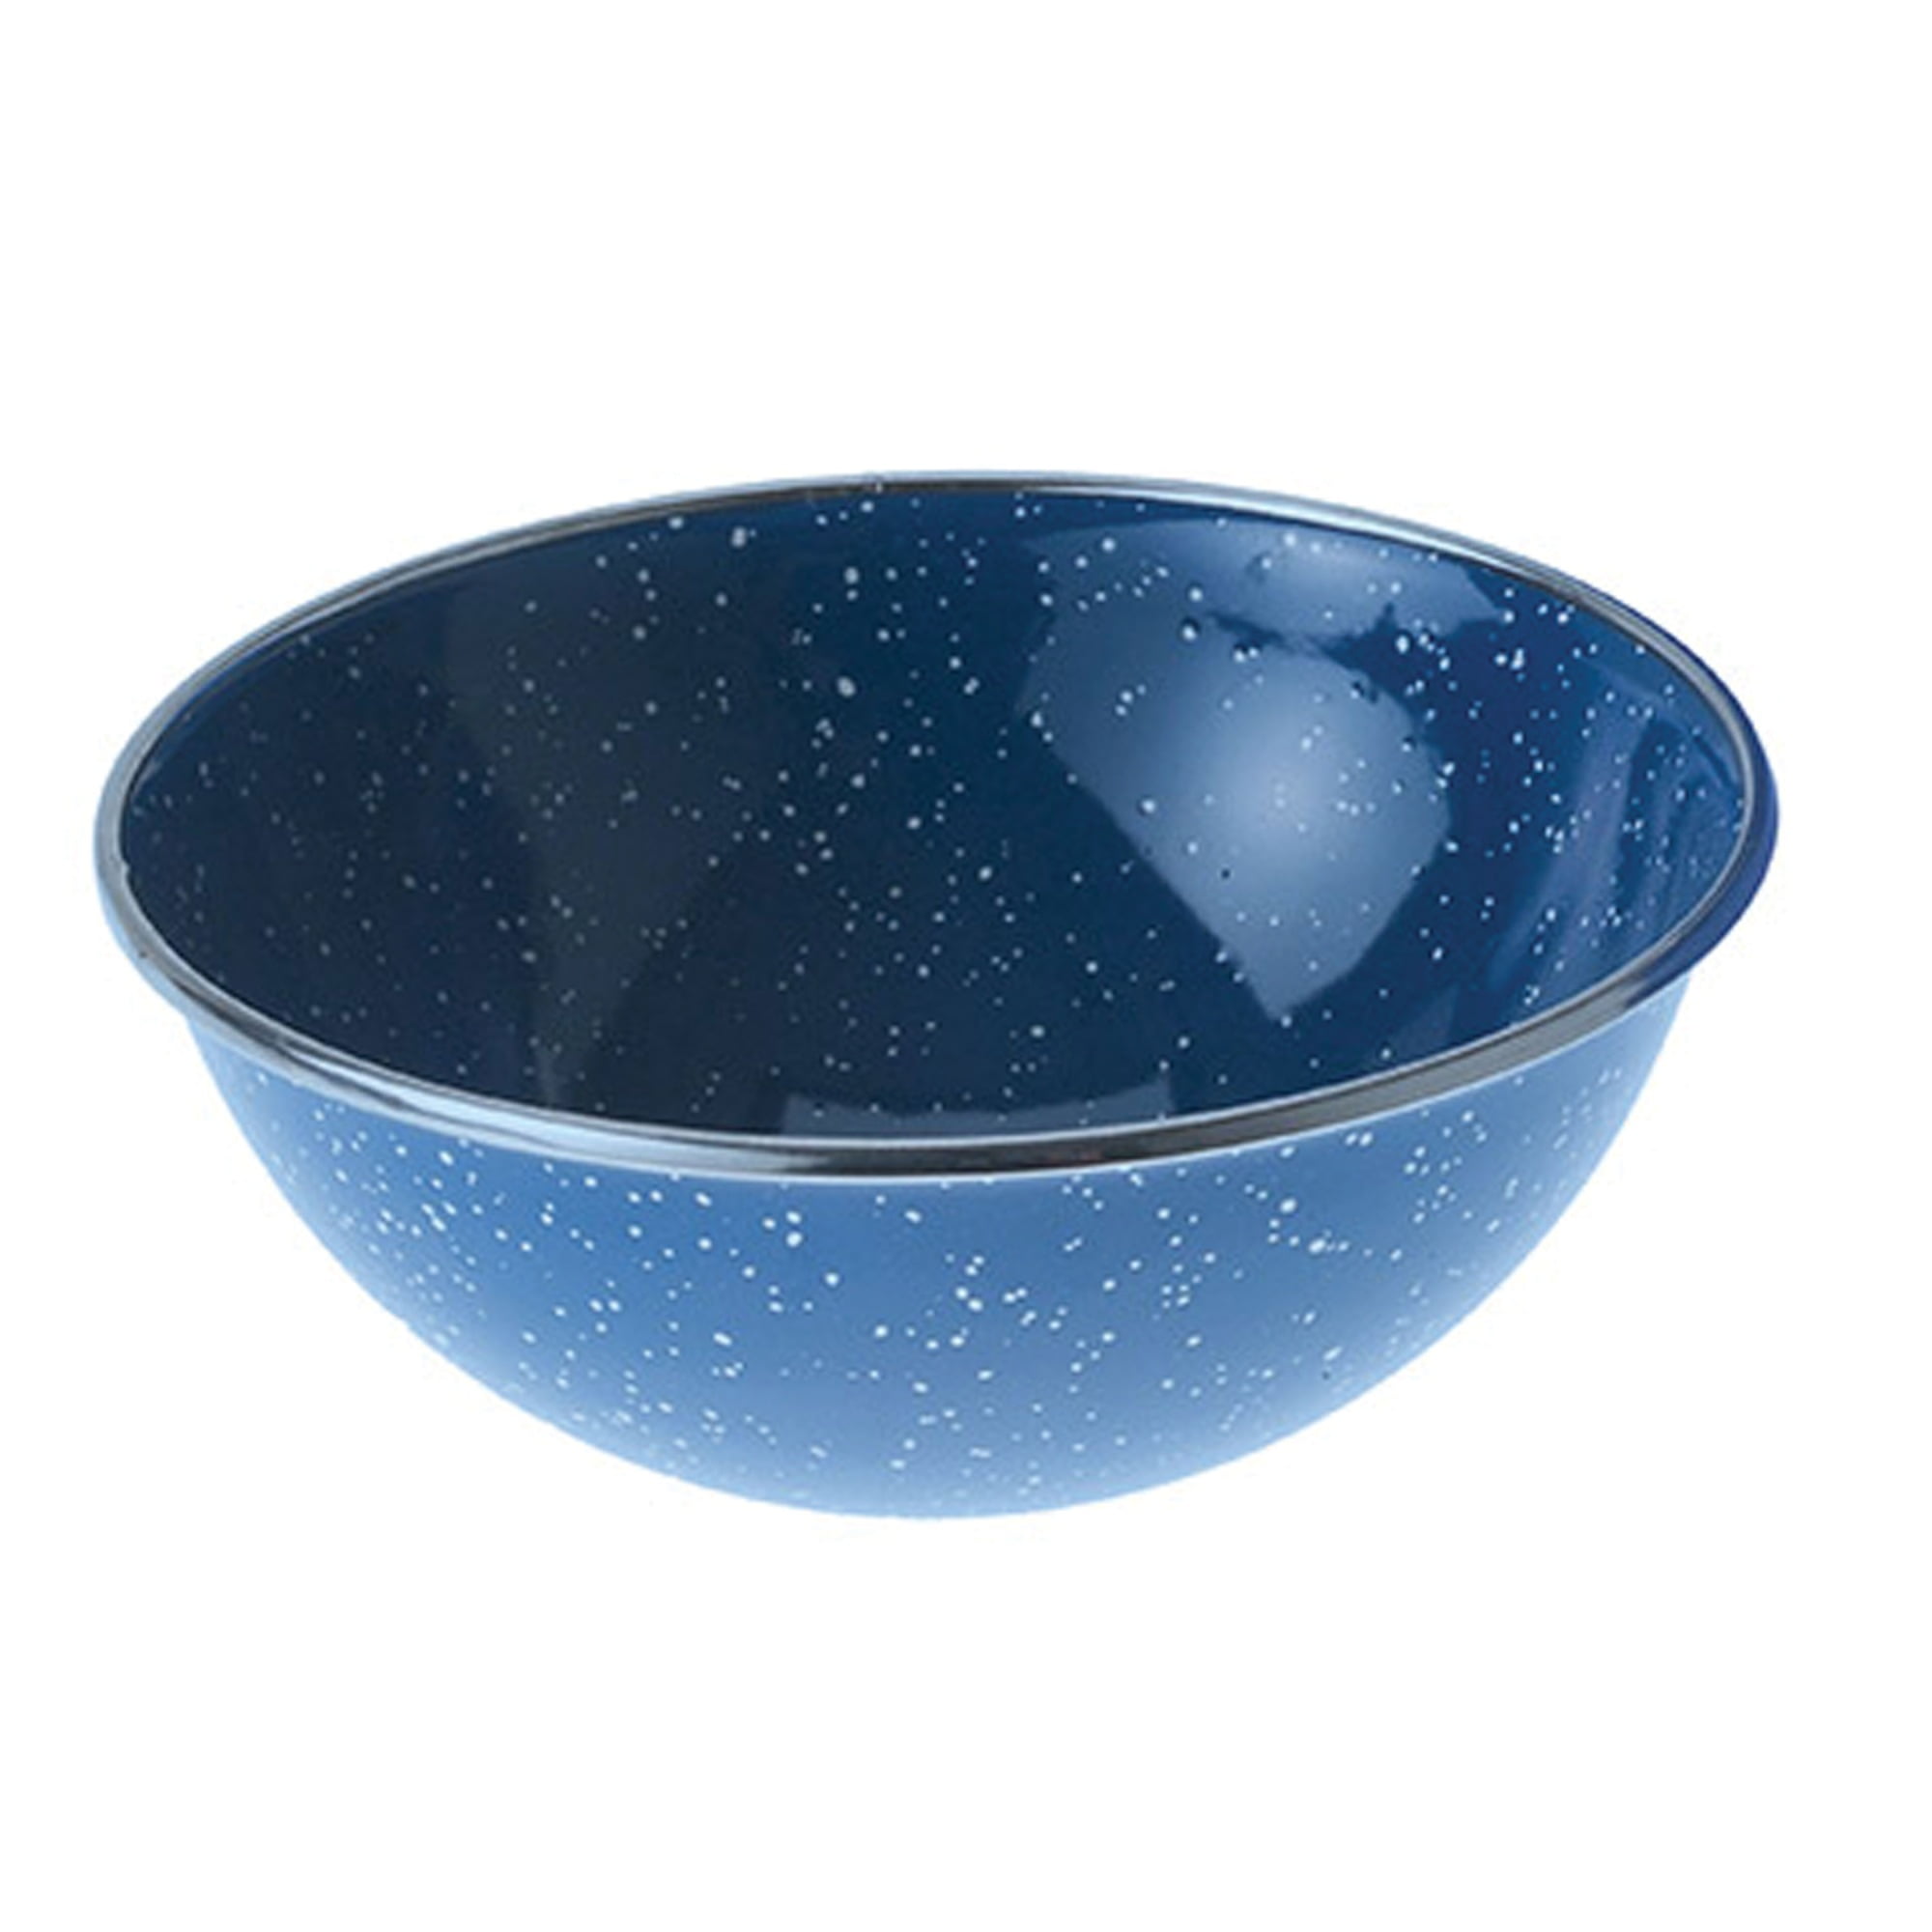 One Size Unisex Adult GSI Outdoors CASCADIAN Bowl Blue